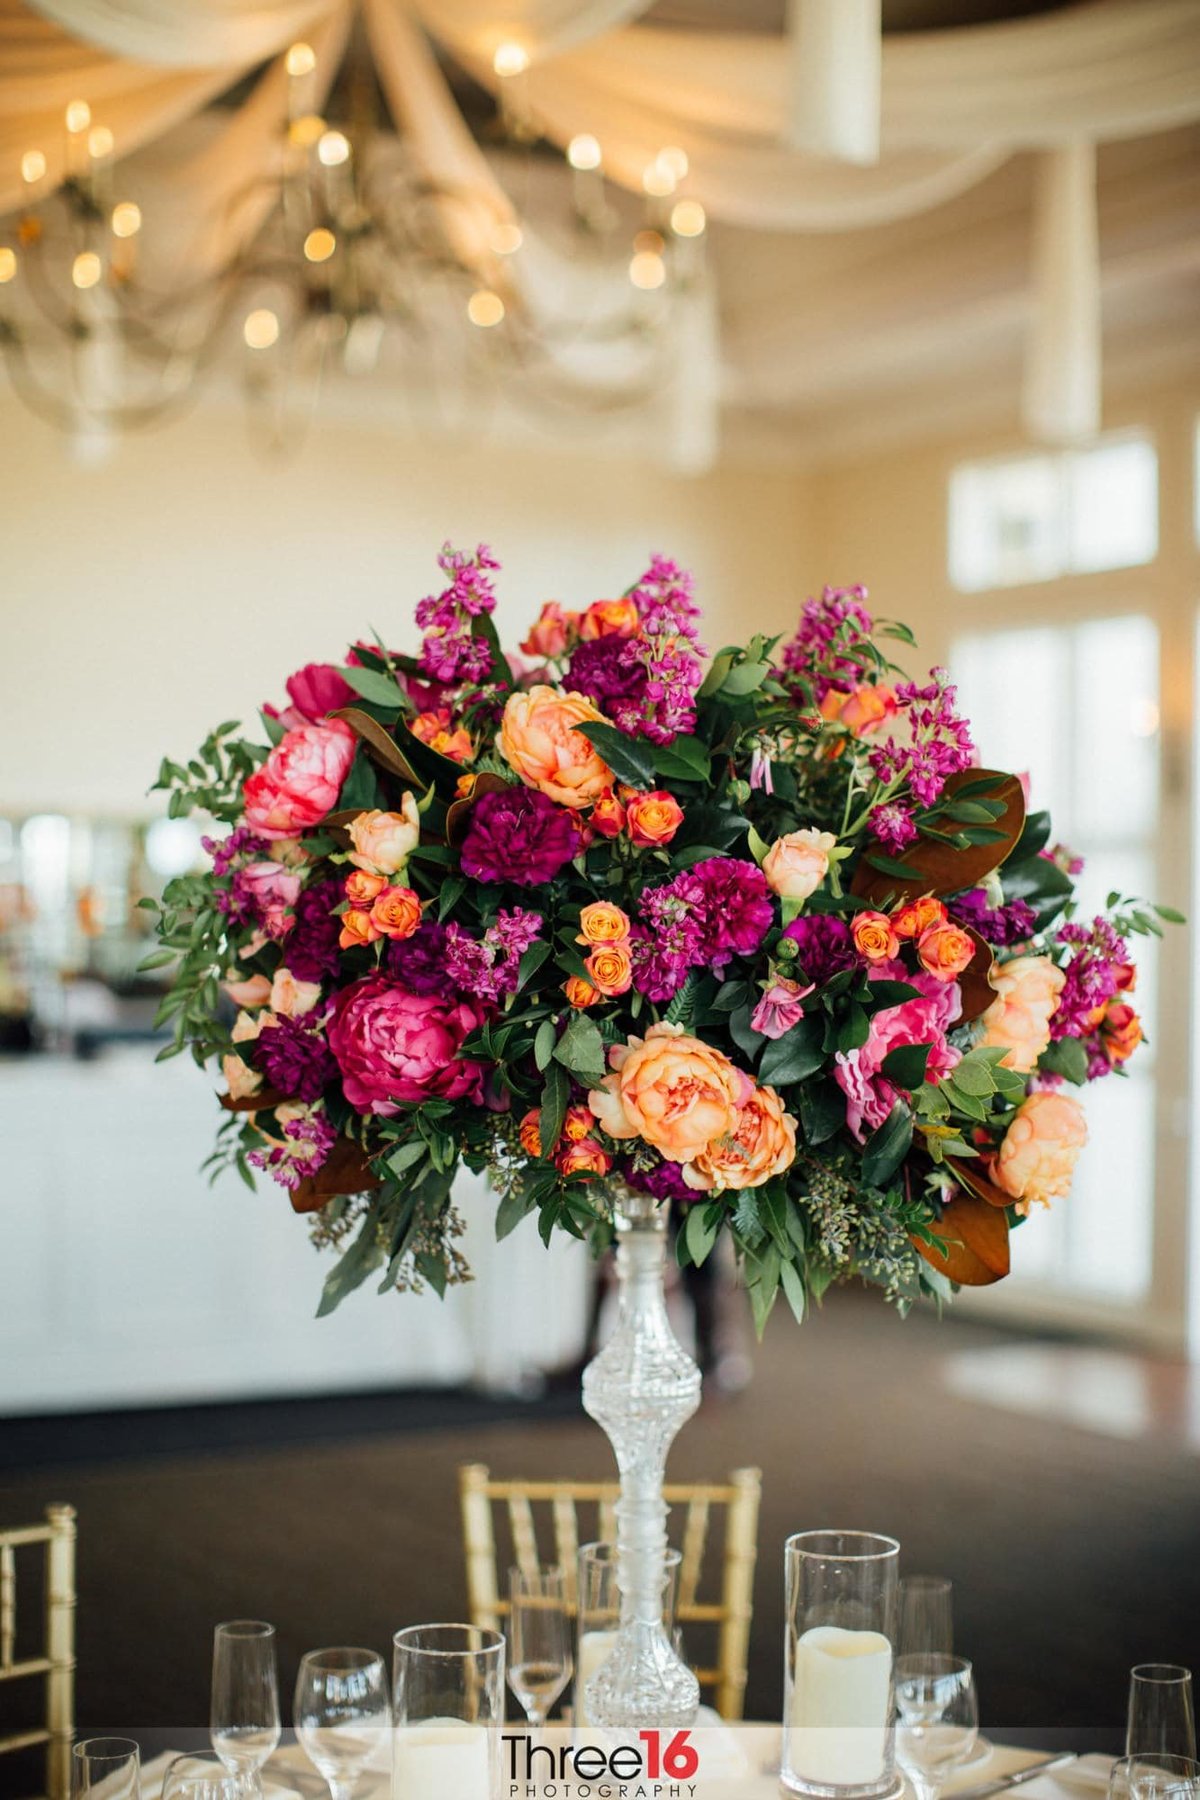 Colorful array of flowers as a wedding reception table centerpiece